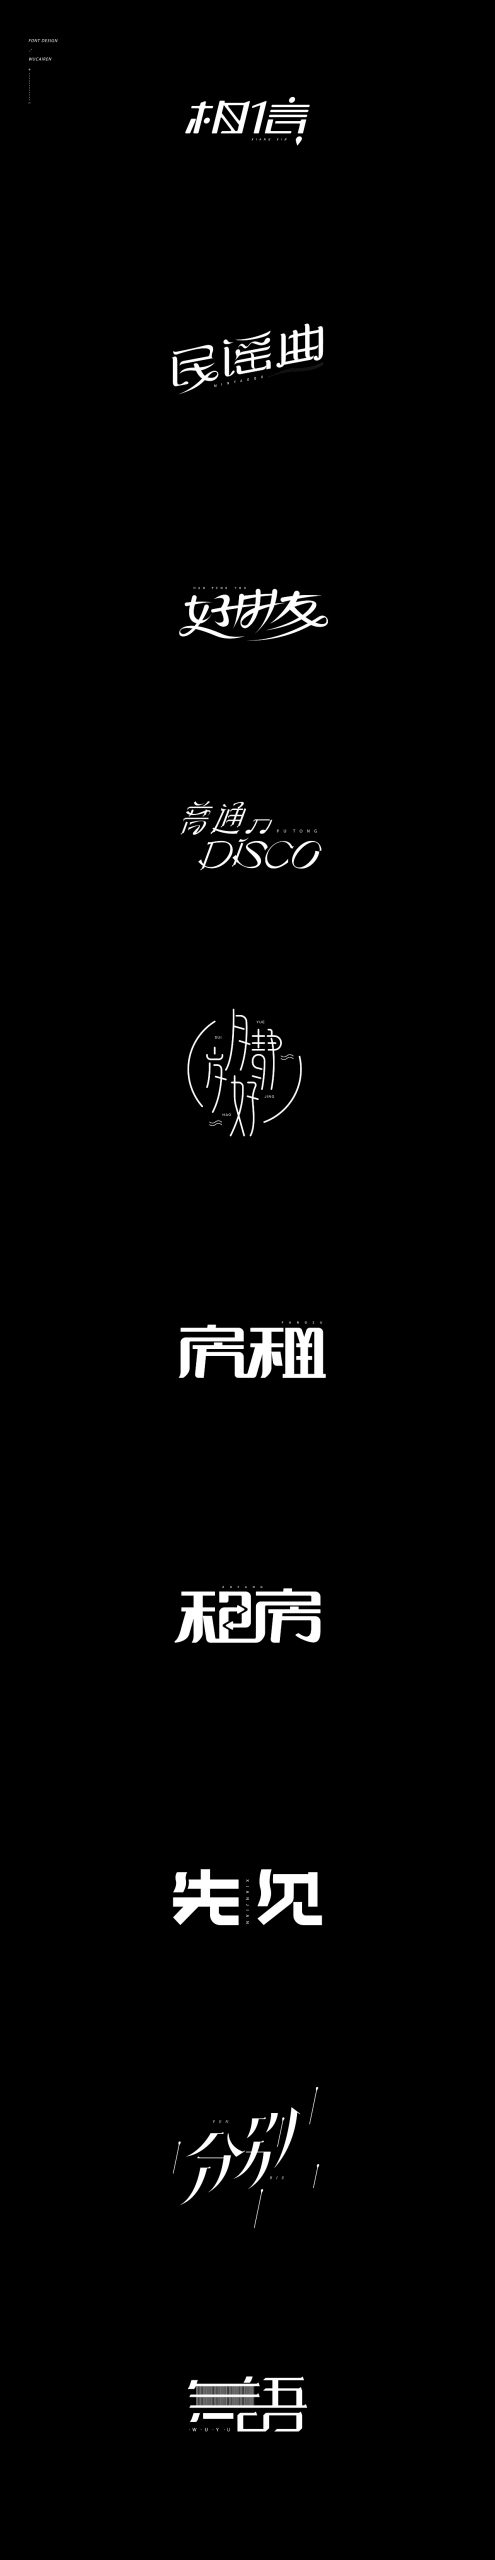 Chinese Creative Font Design-Simple Style Font Design Series